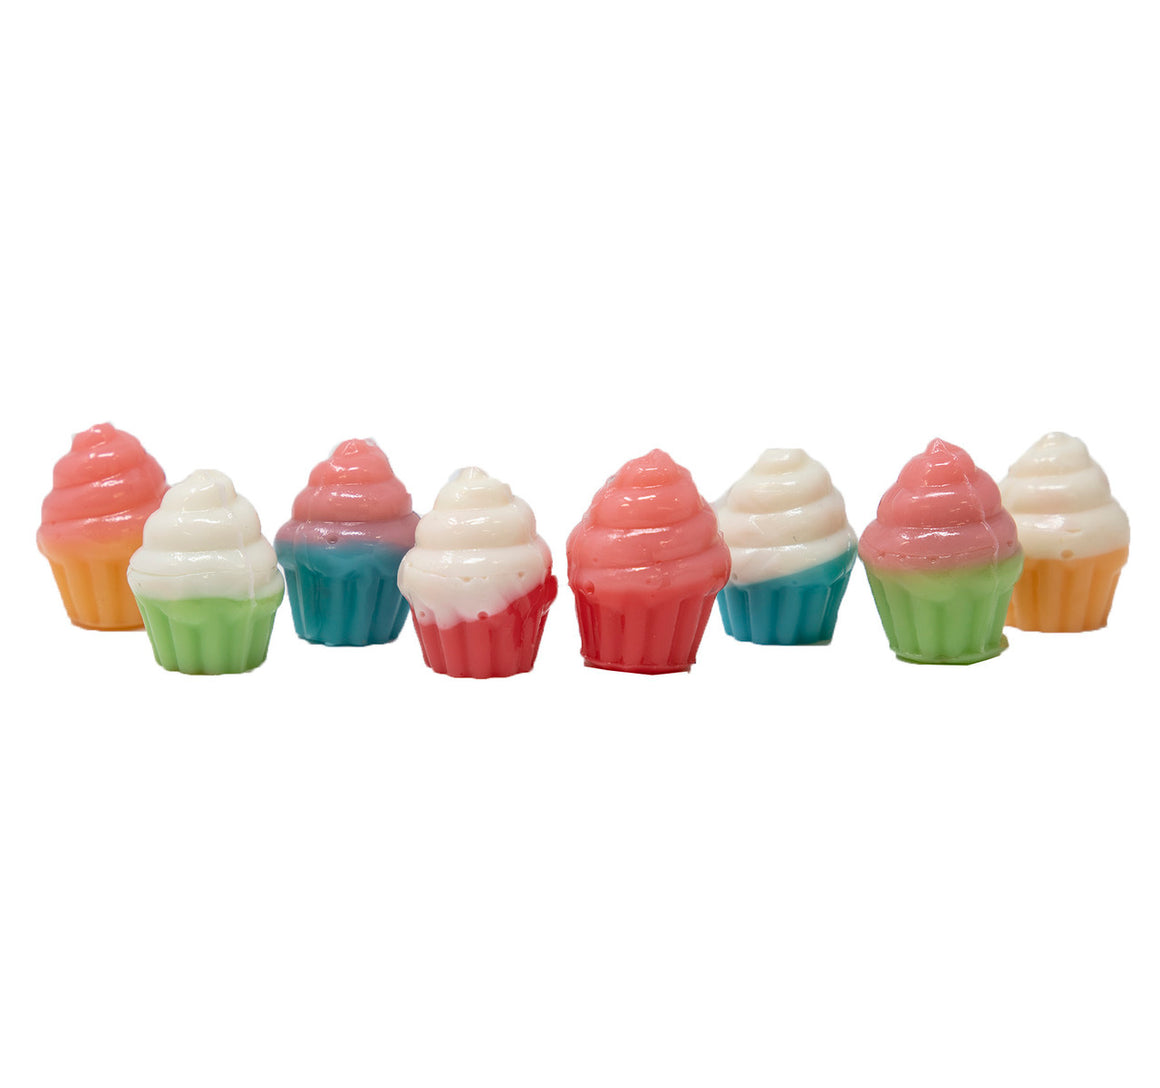 All City Candy 4D Gummy Cupcakes 2.2 lb. Bulk Bag- For fresh candy and great service, visit www.allcitycandy.com